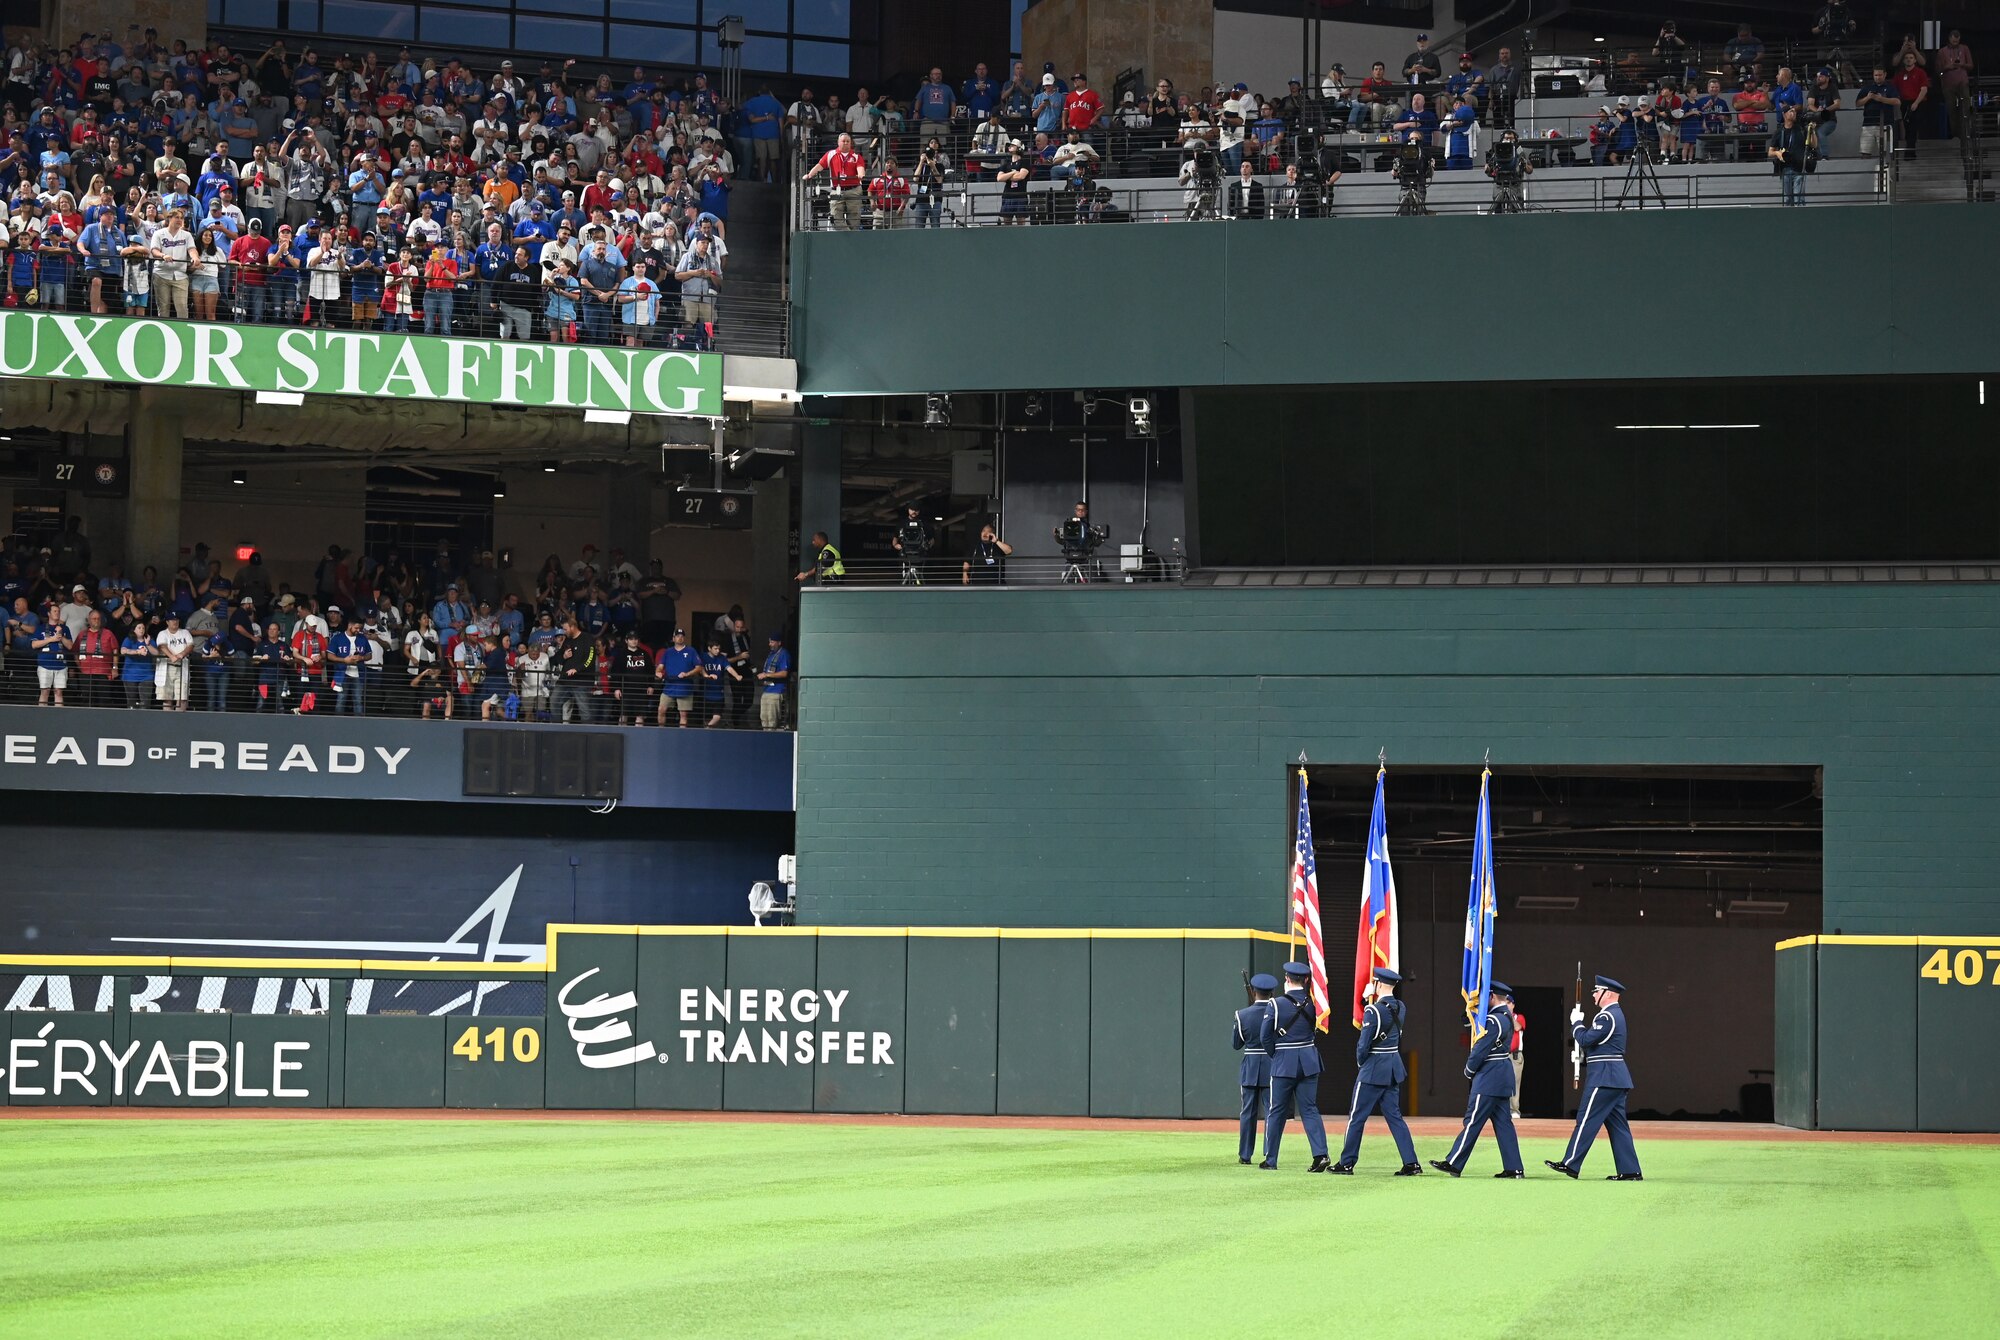 The Dyess Honor Guard exits the field after the national anthem during the World Series opening game at Globe Life Field in Arlington, Texas, Oct. 27, 2023. This was the first time Dyess Honor Guardsmen have presented the colors during a Texas Rangers World Series game and the first time since 2011 since the Rangers have played in a World Series game. (U.S. Air Force photo by Staff Sgt. Holly Cook)